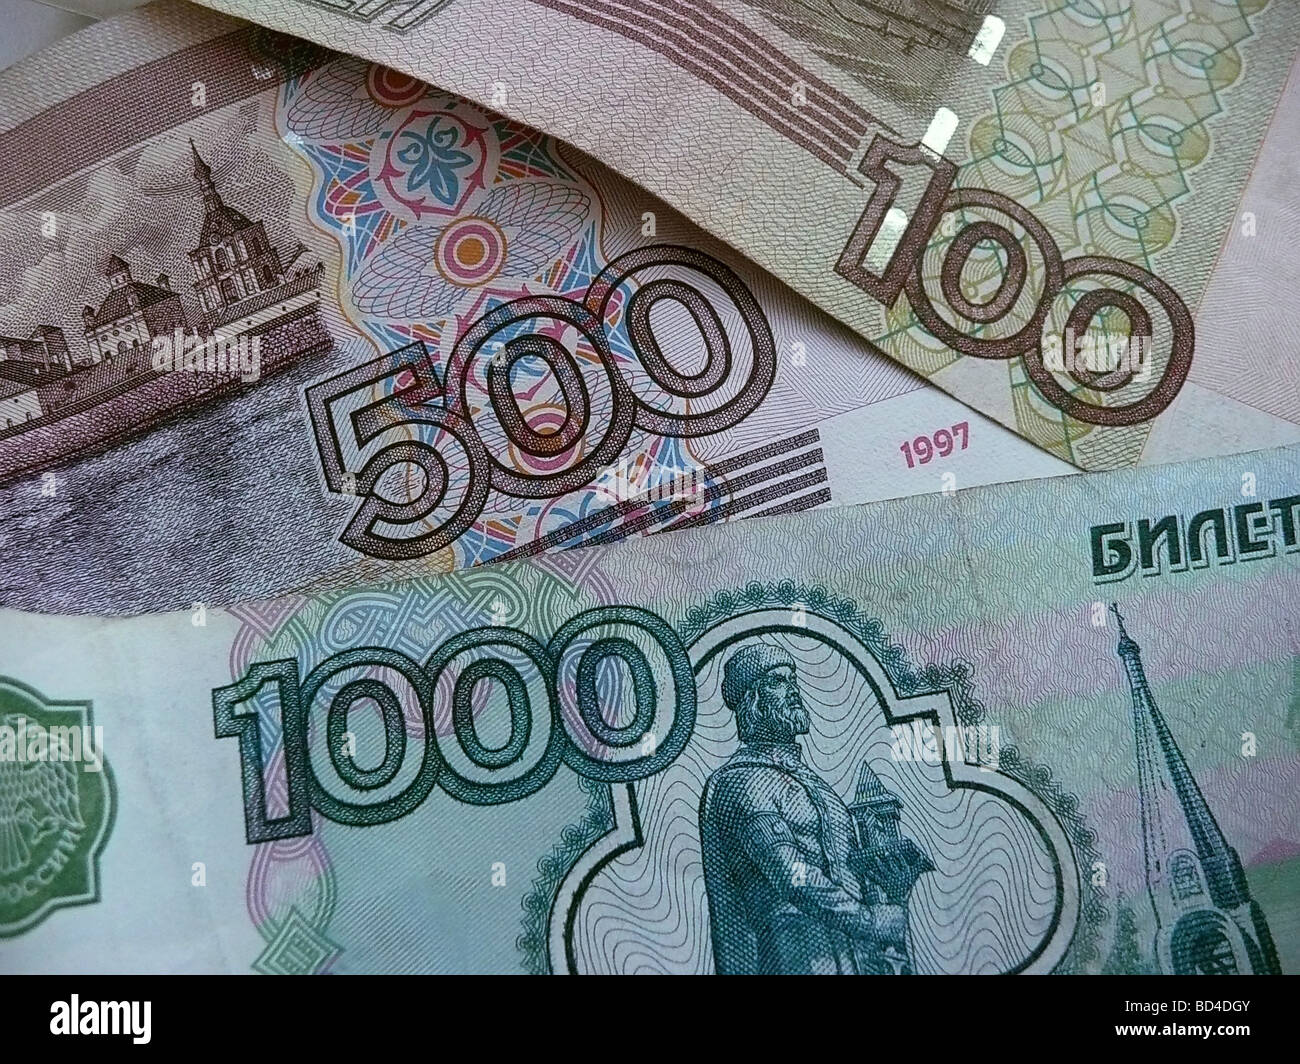 Russia, St Petersburg, Russian roubles Stock Photo